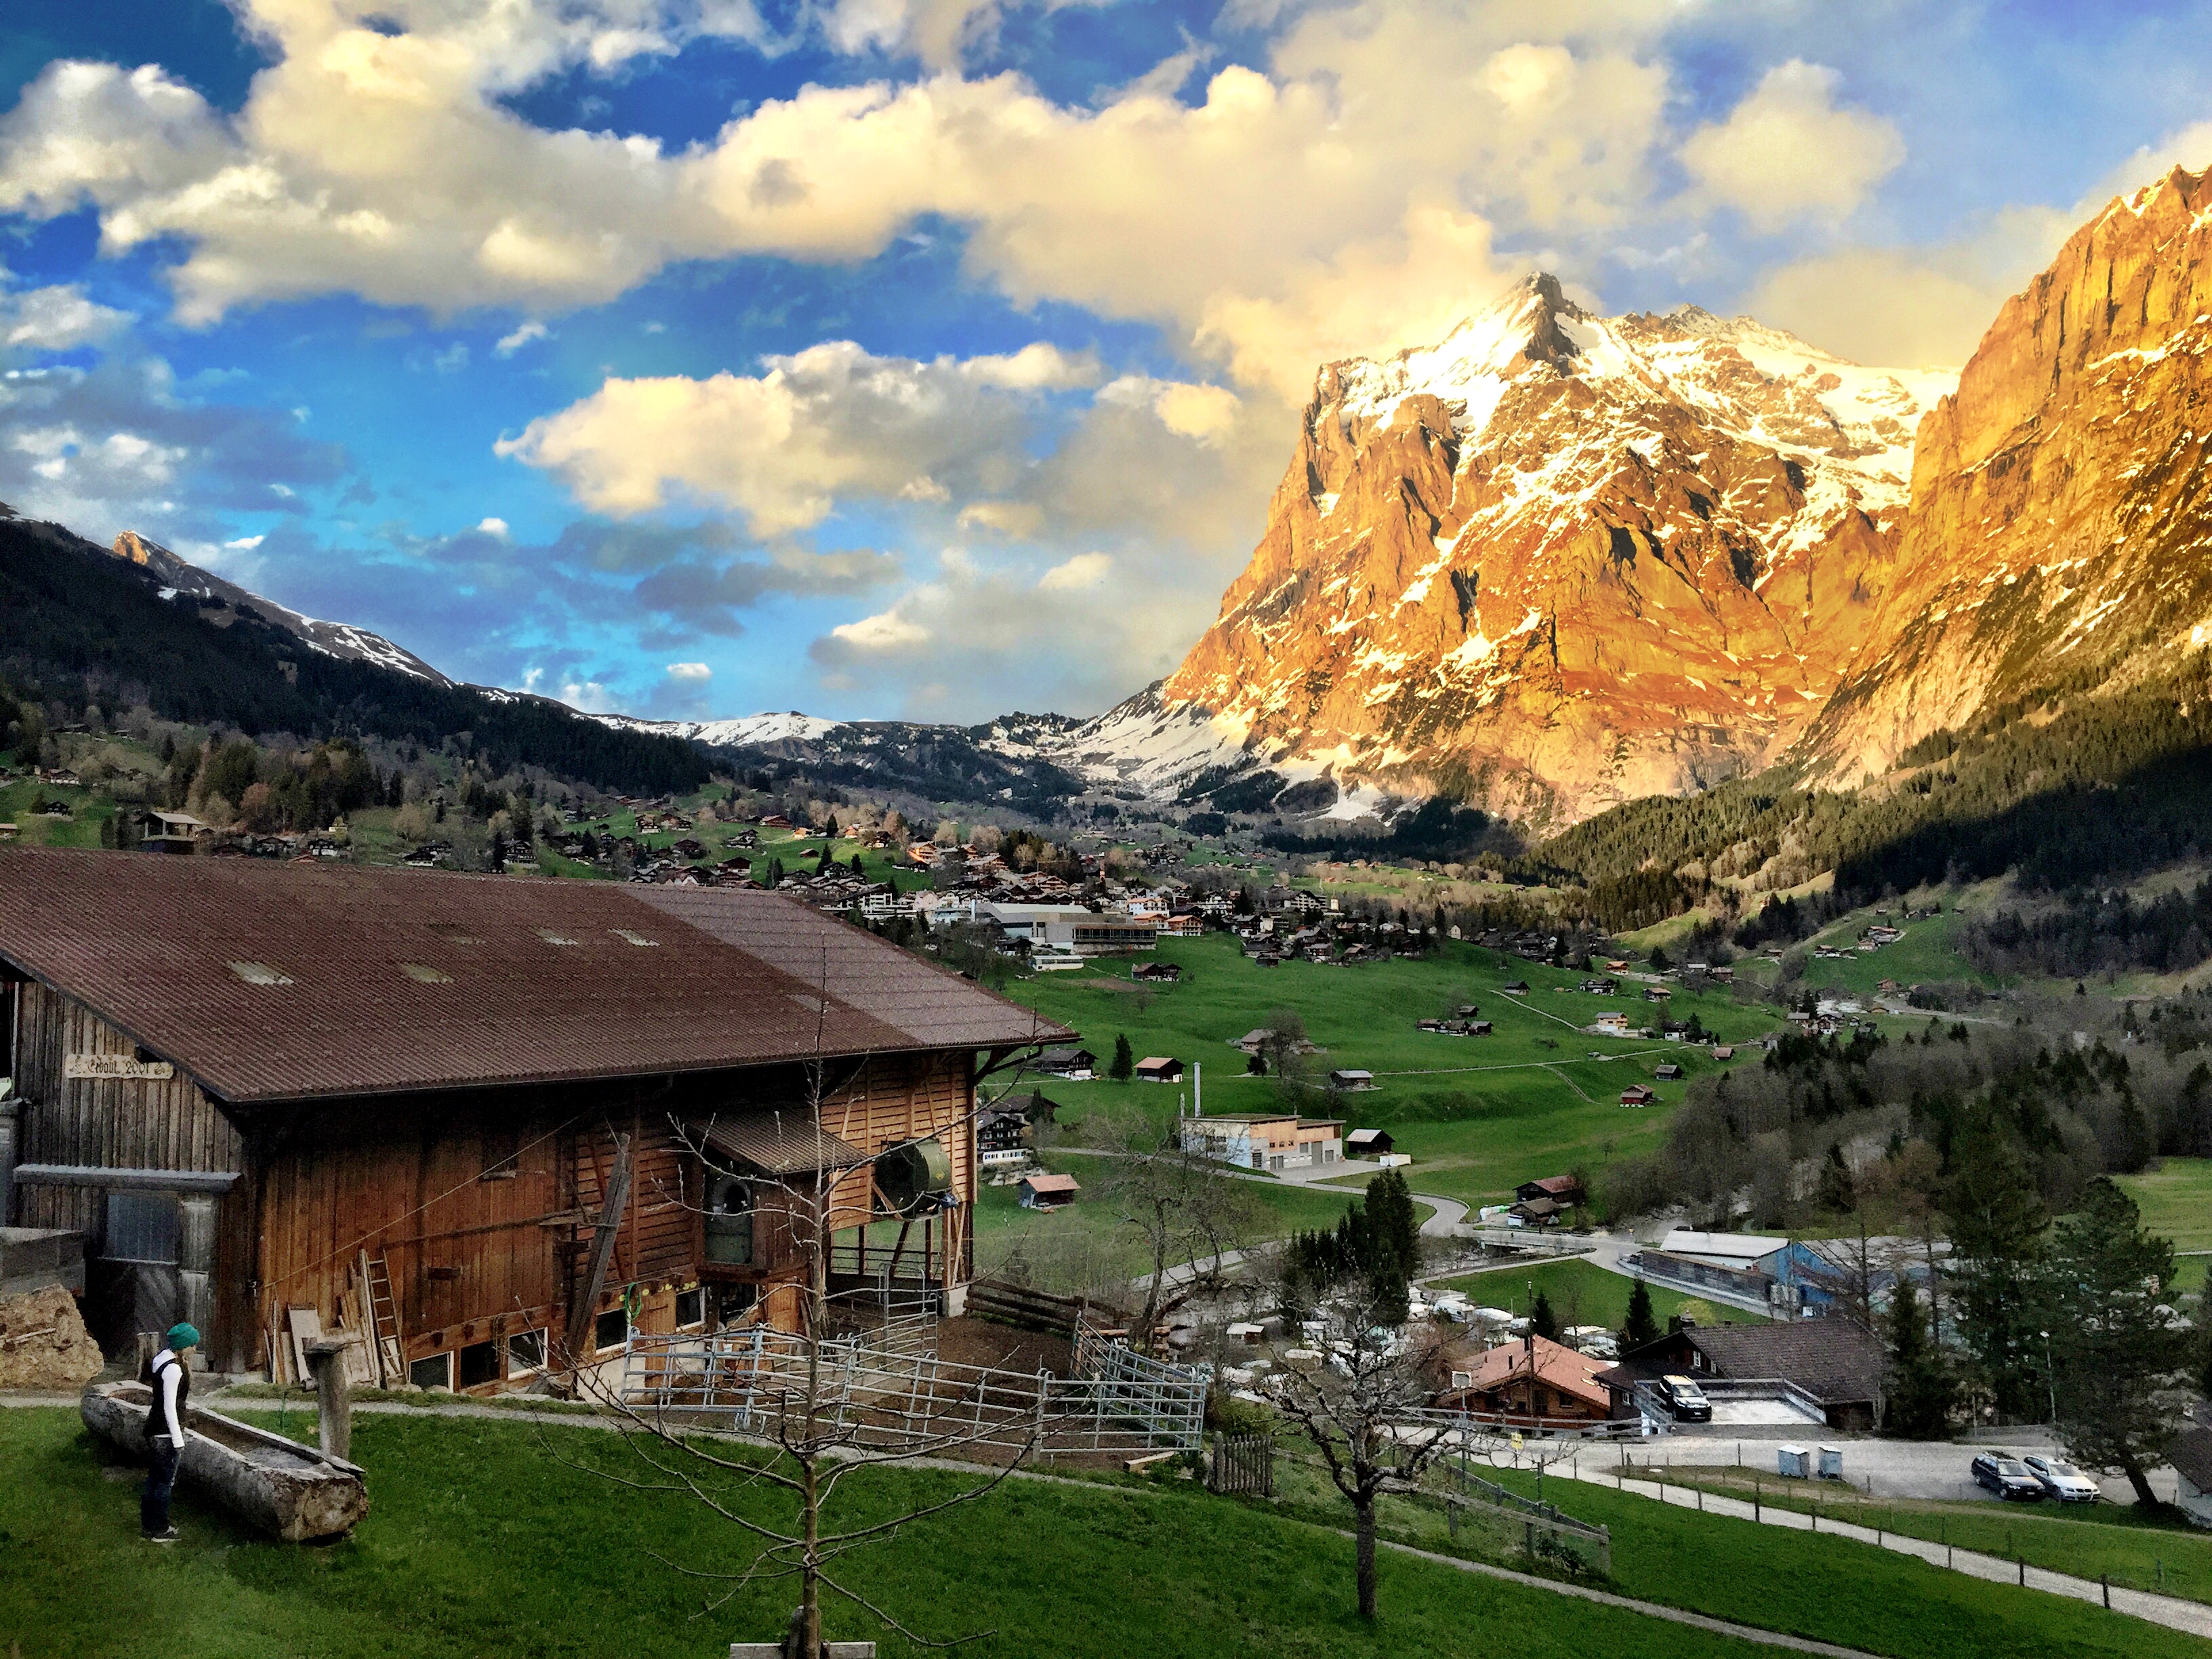 Where to stay in grindelwald